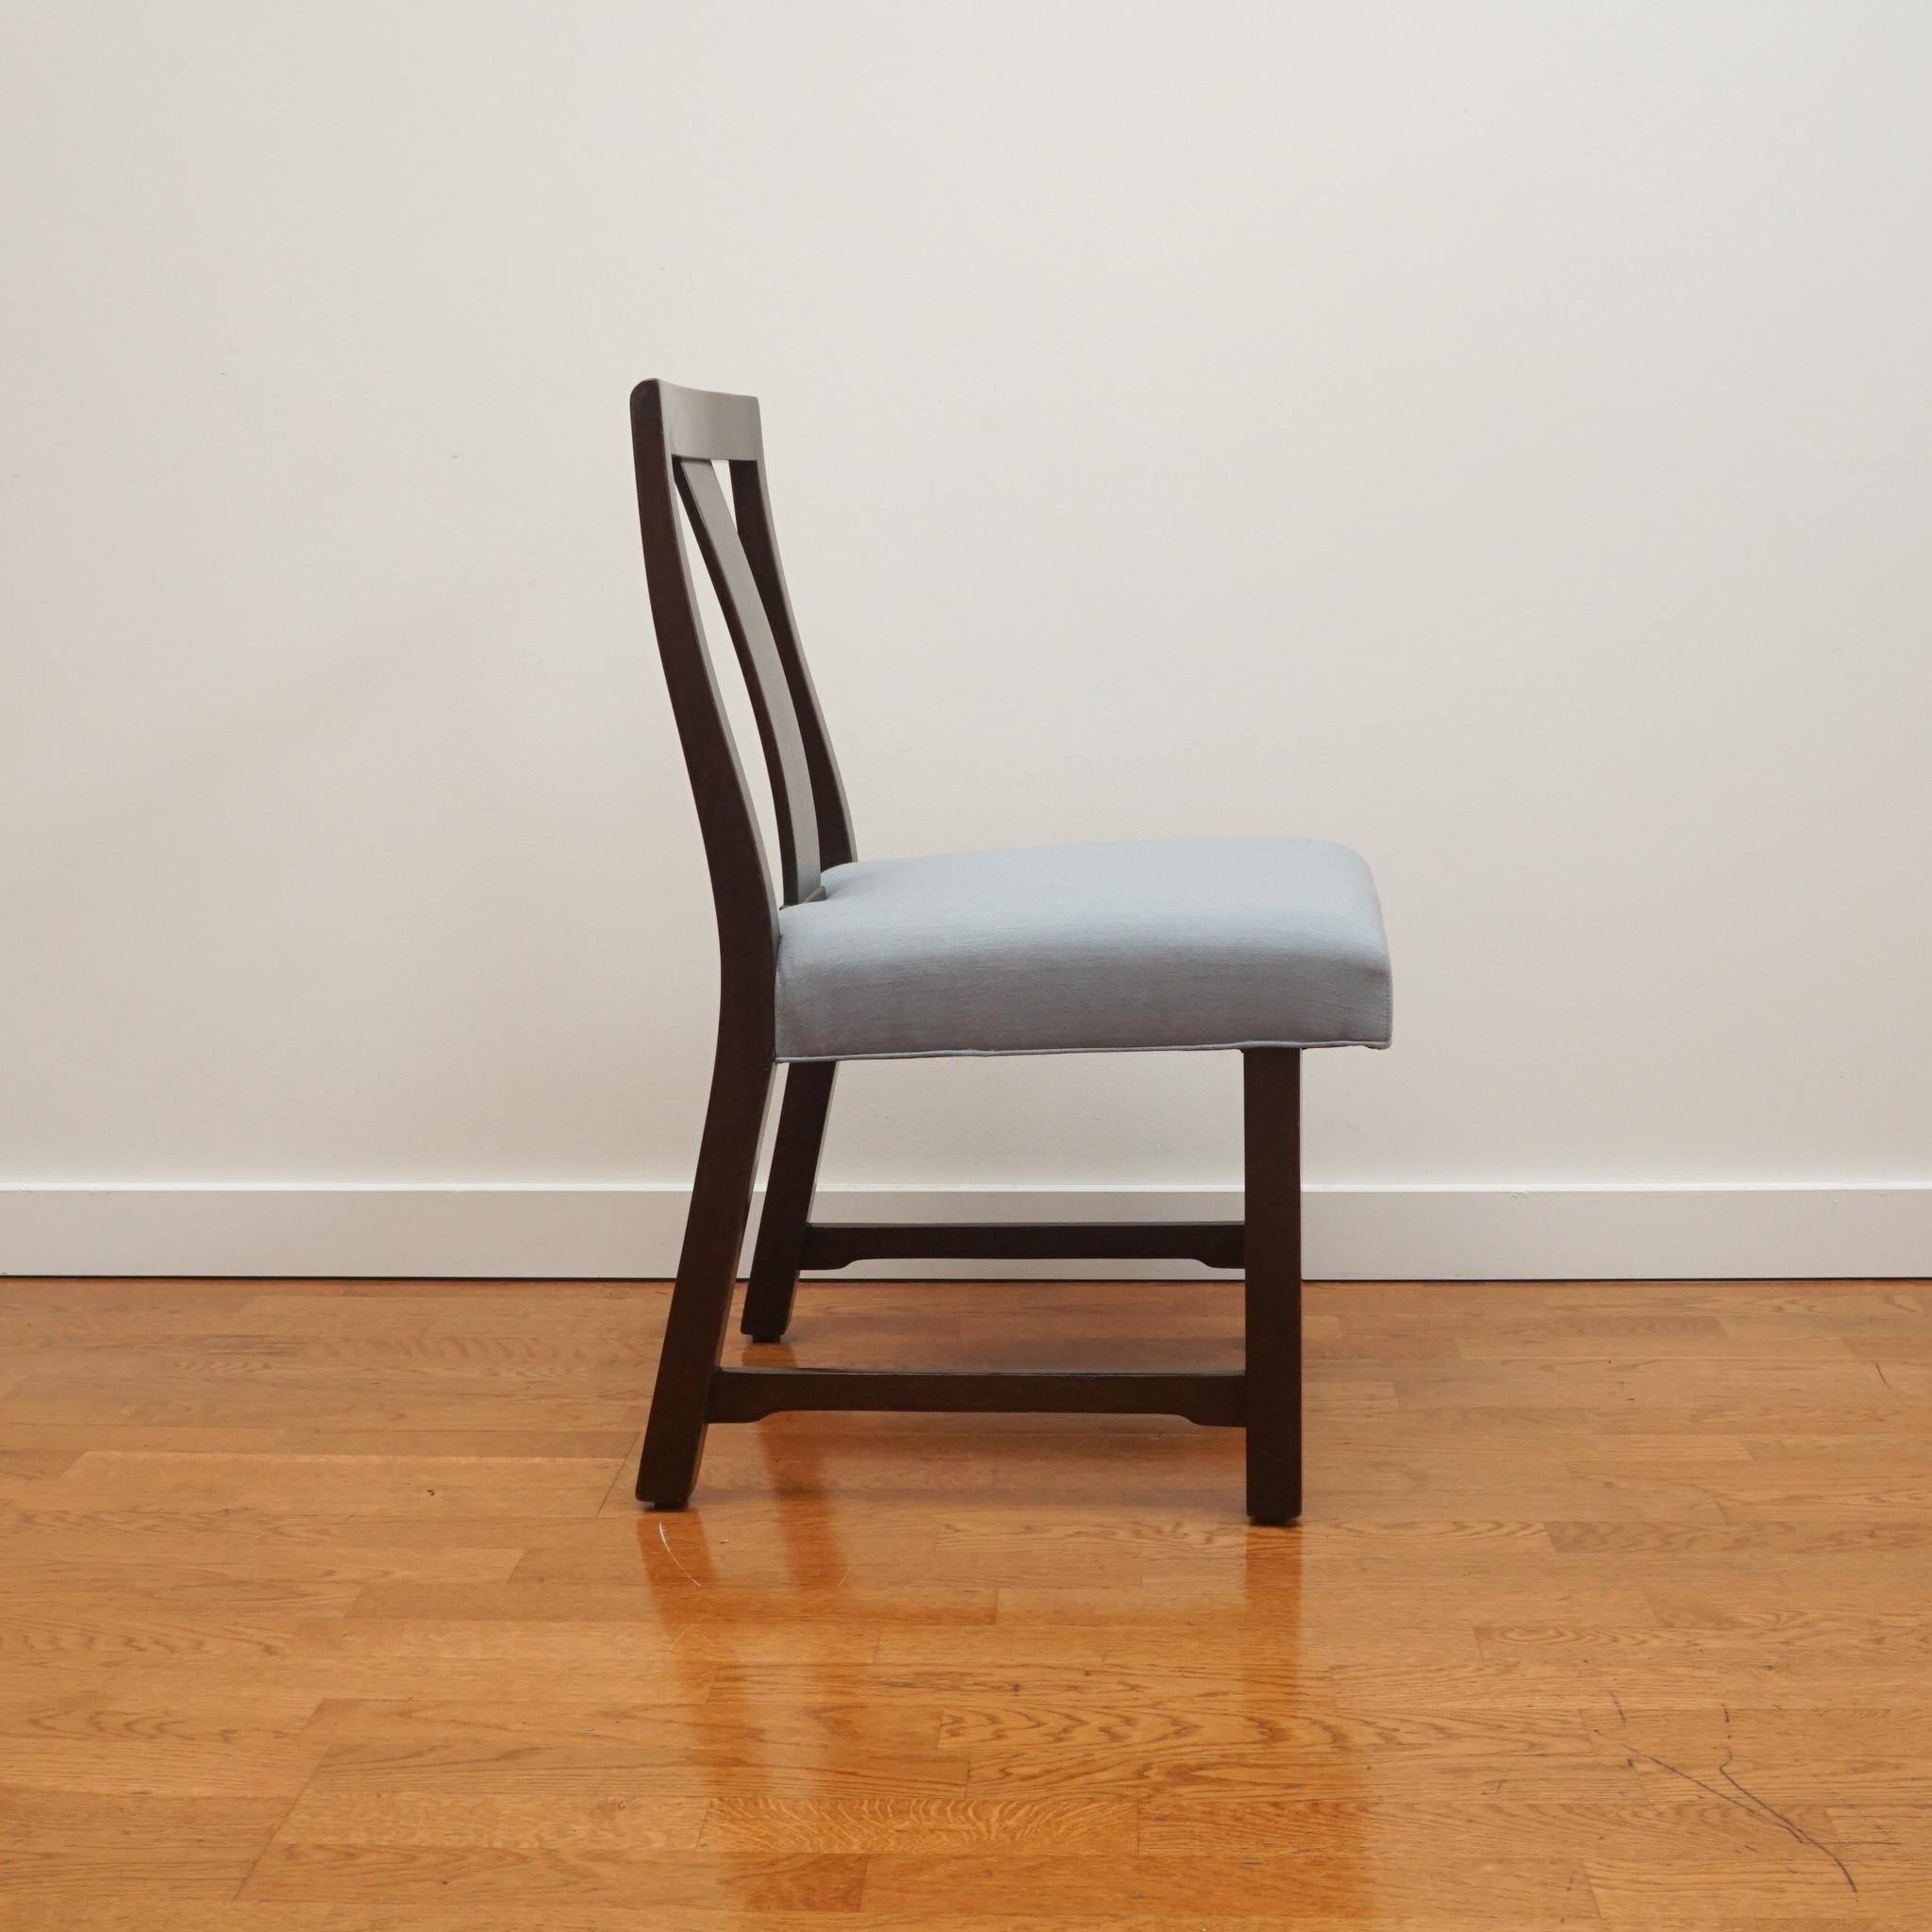 The armless dining chair, shown here, is attributed to Edward Wormely for Dunbar. Featuring a splat back support with slightly cantilevered seat front, the mahogany armless dining chair is one of four available. 

